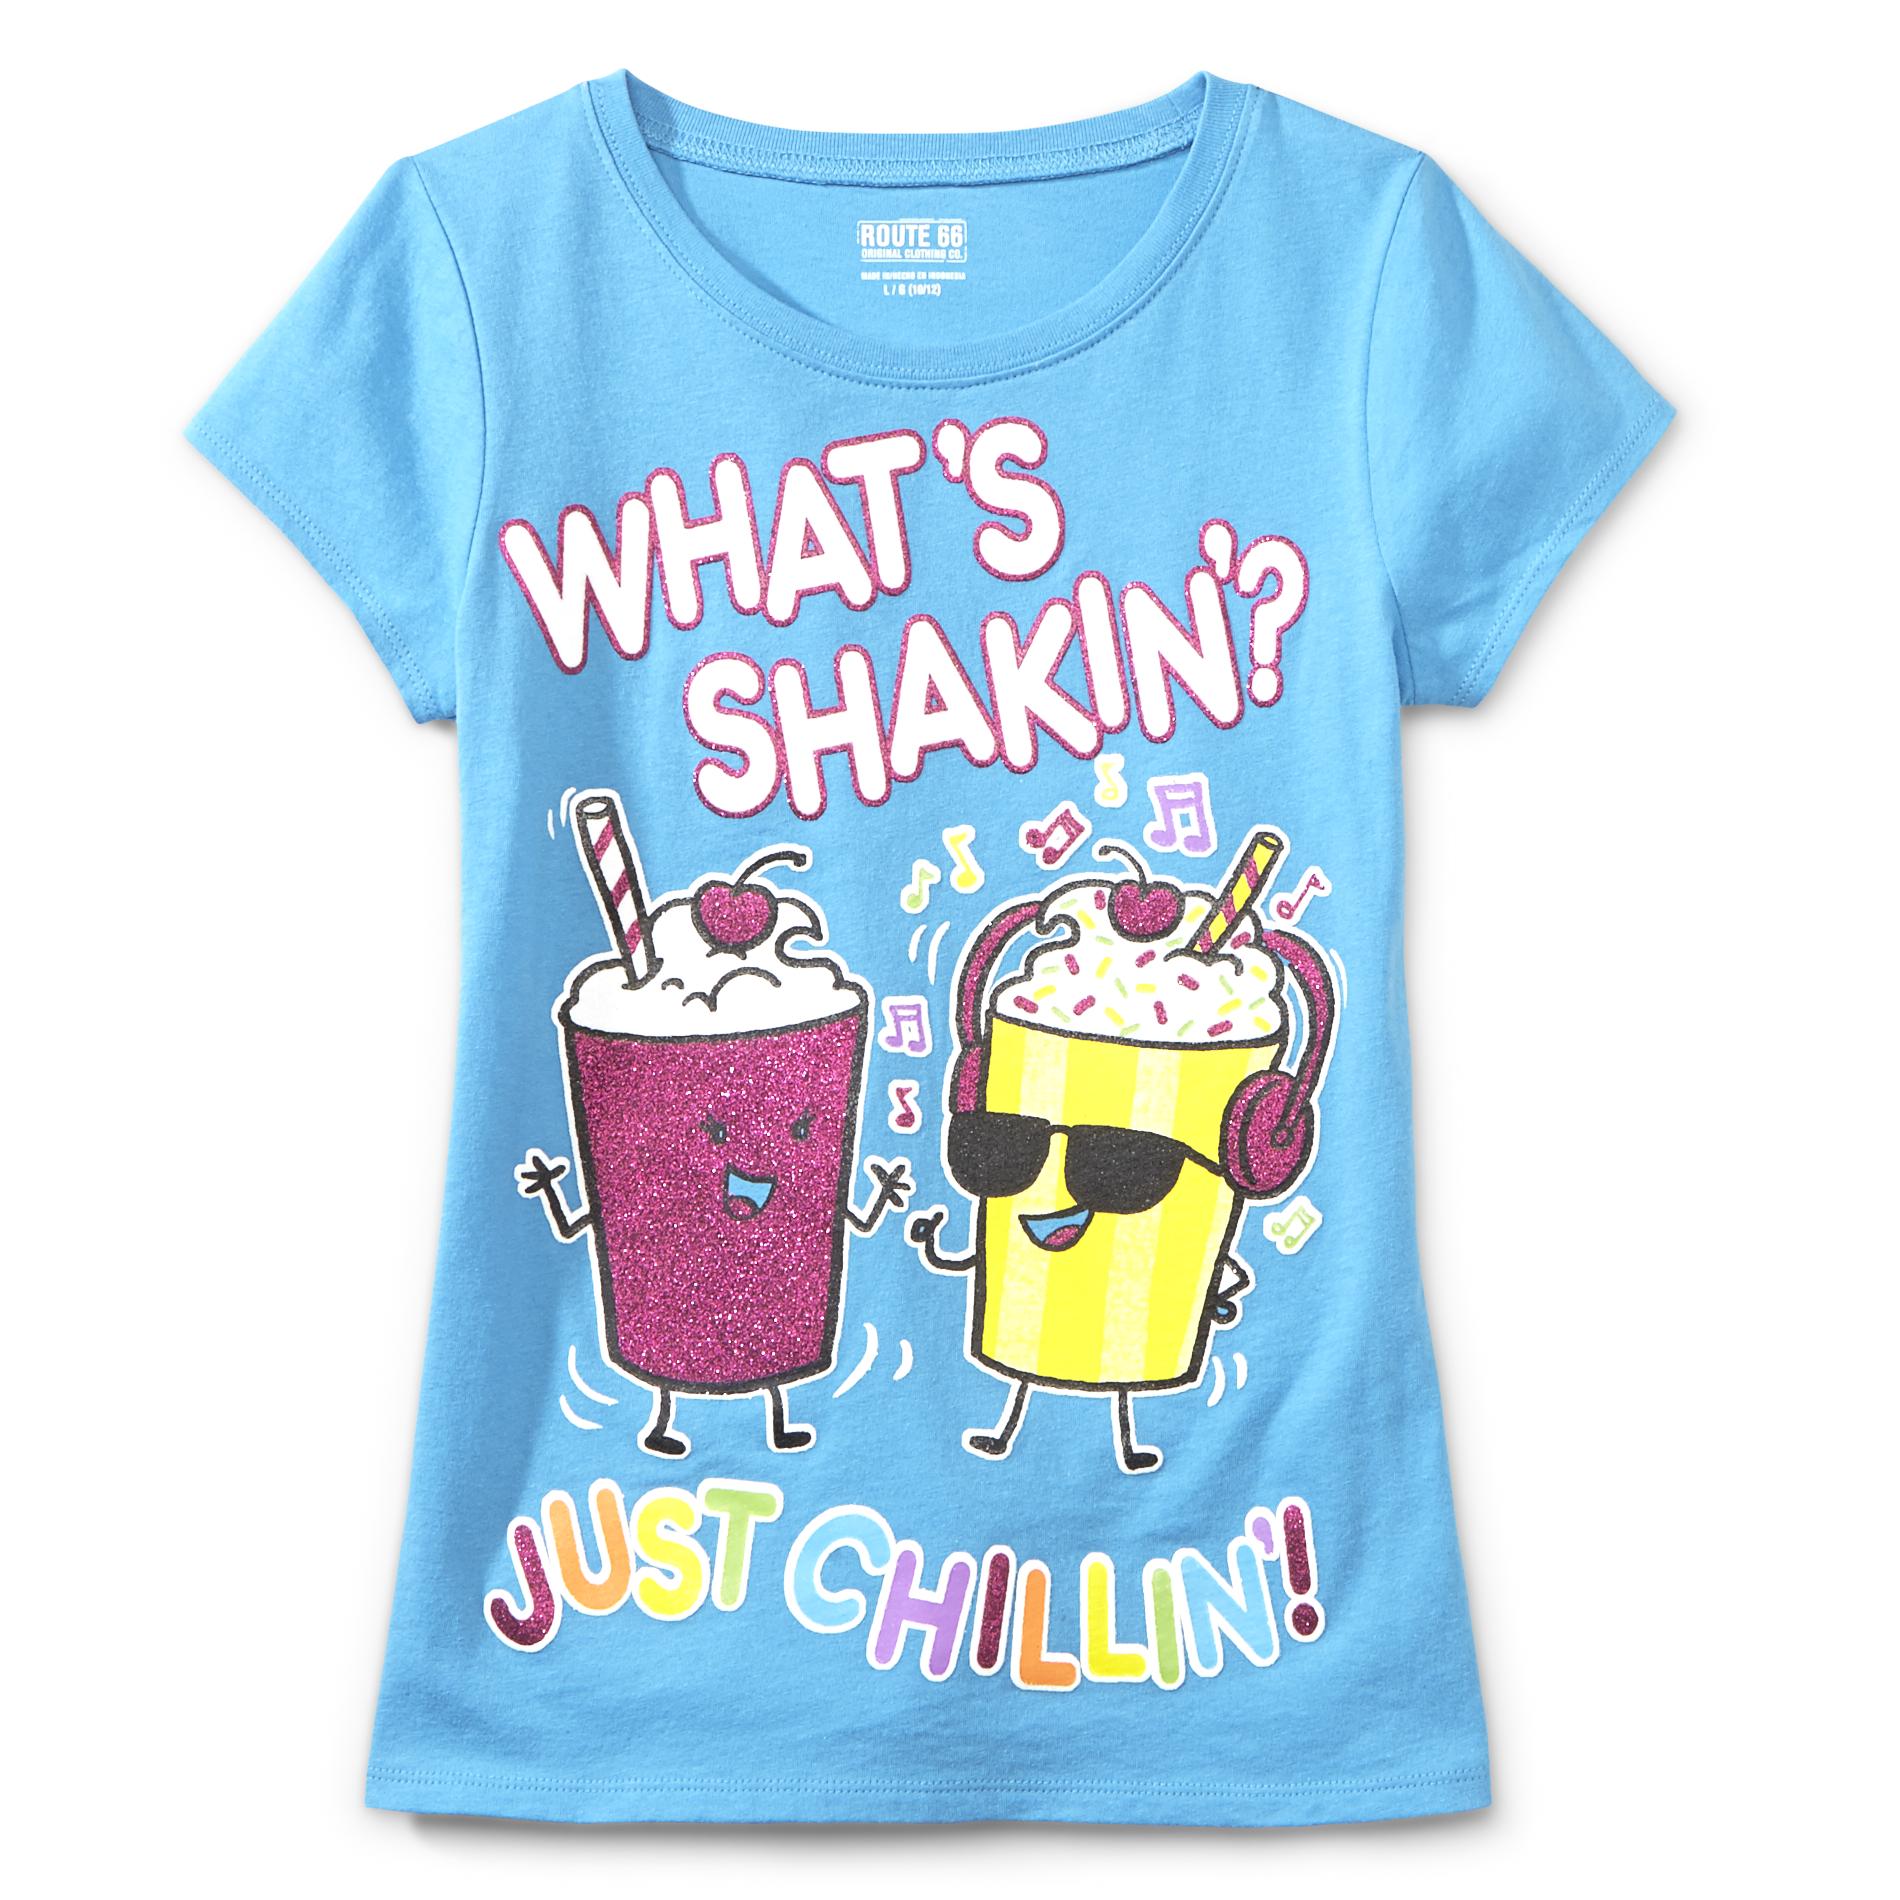 Route 66 Girl's Graphic T-Shirt - What's Shakin'?